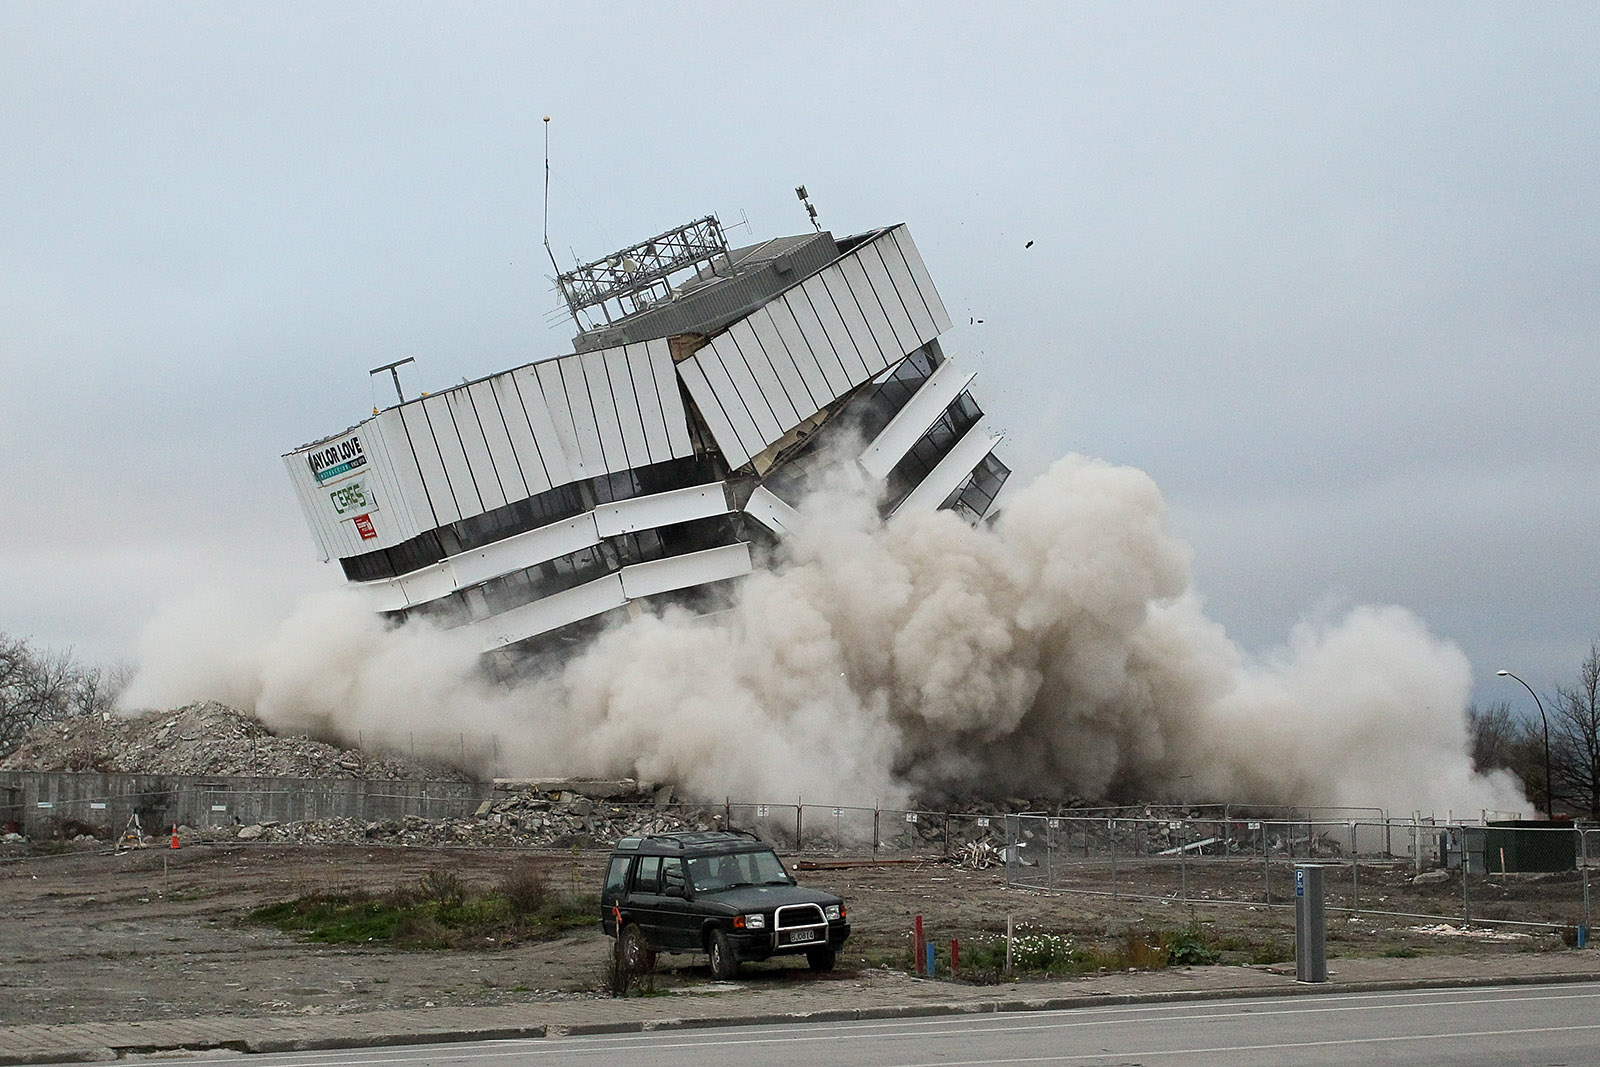 Earthquake Damaged Building Blown Up In Controlled Demolition